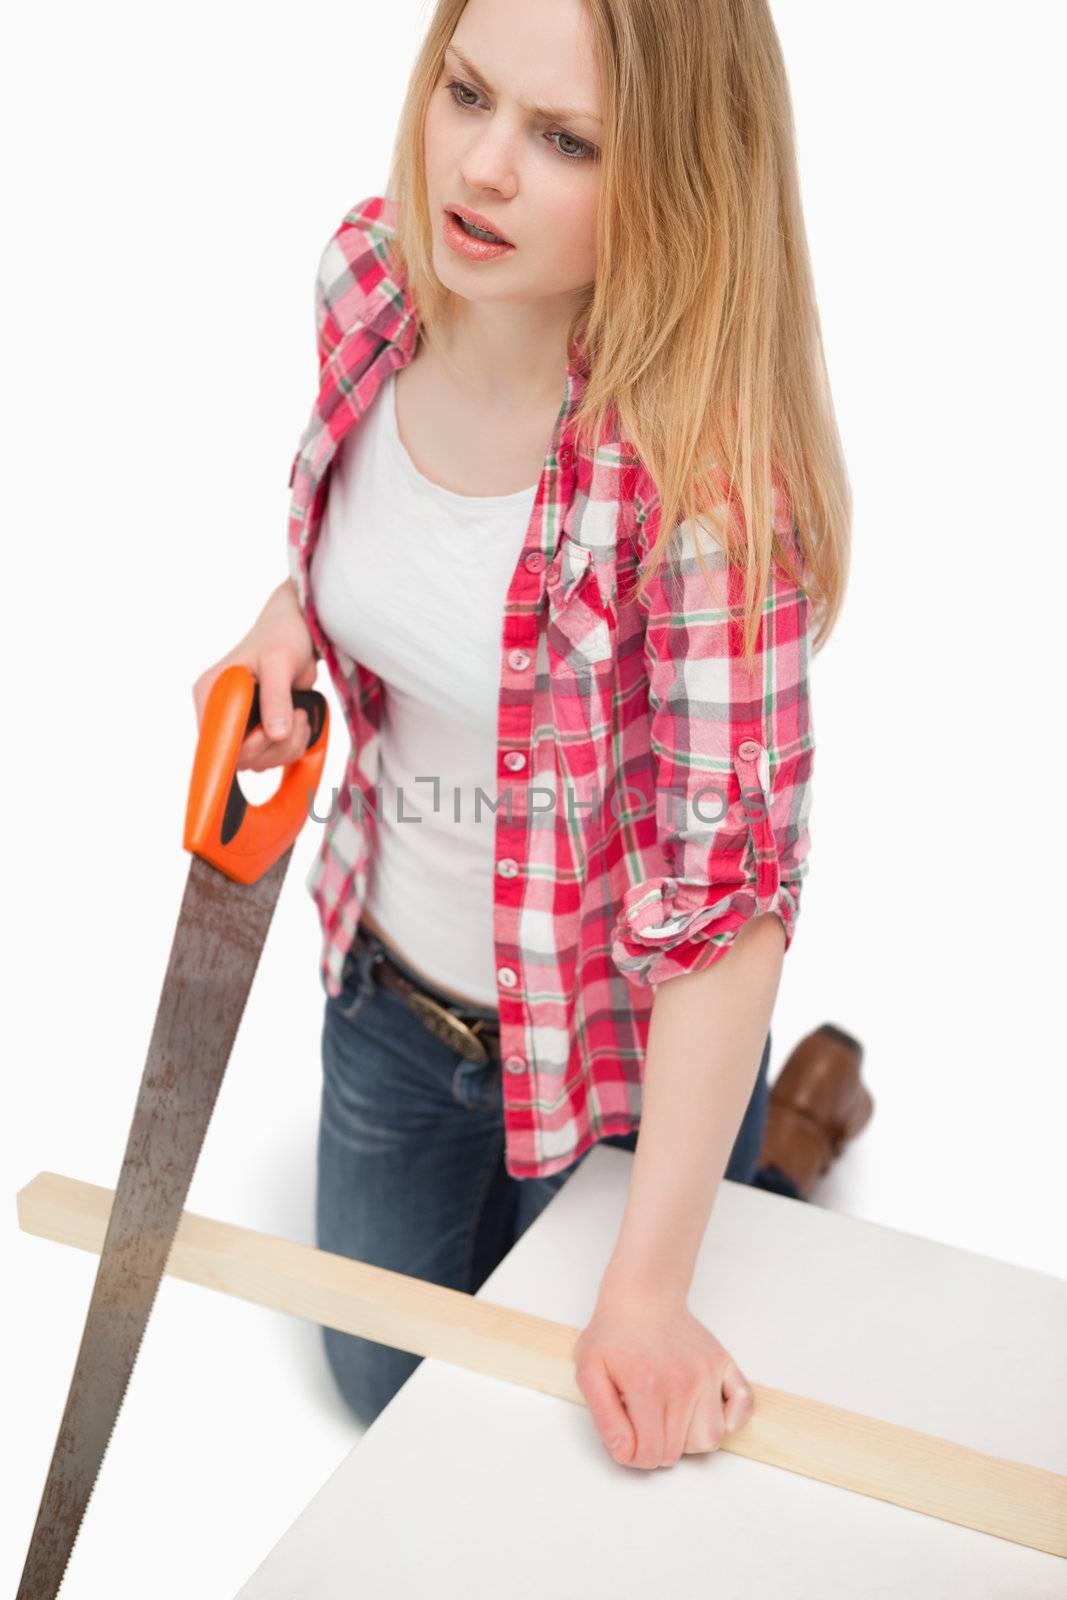 Woman using a wood saw against white background